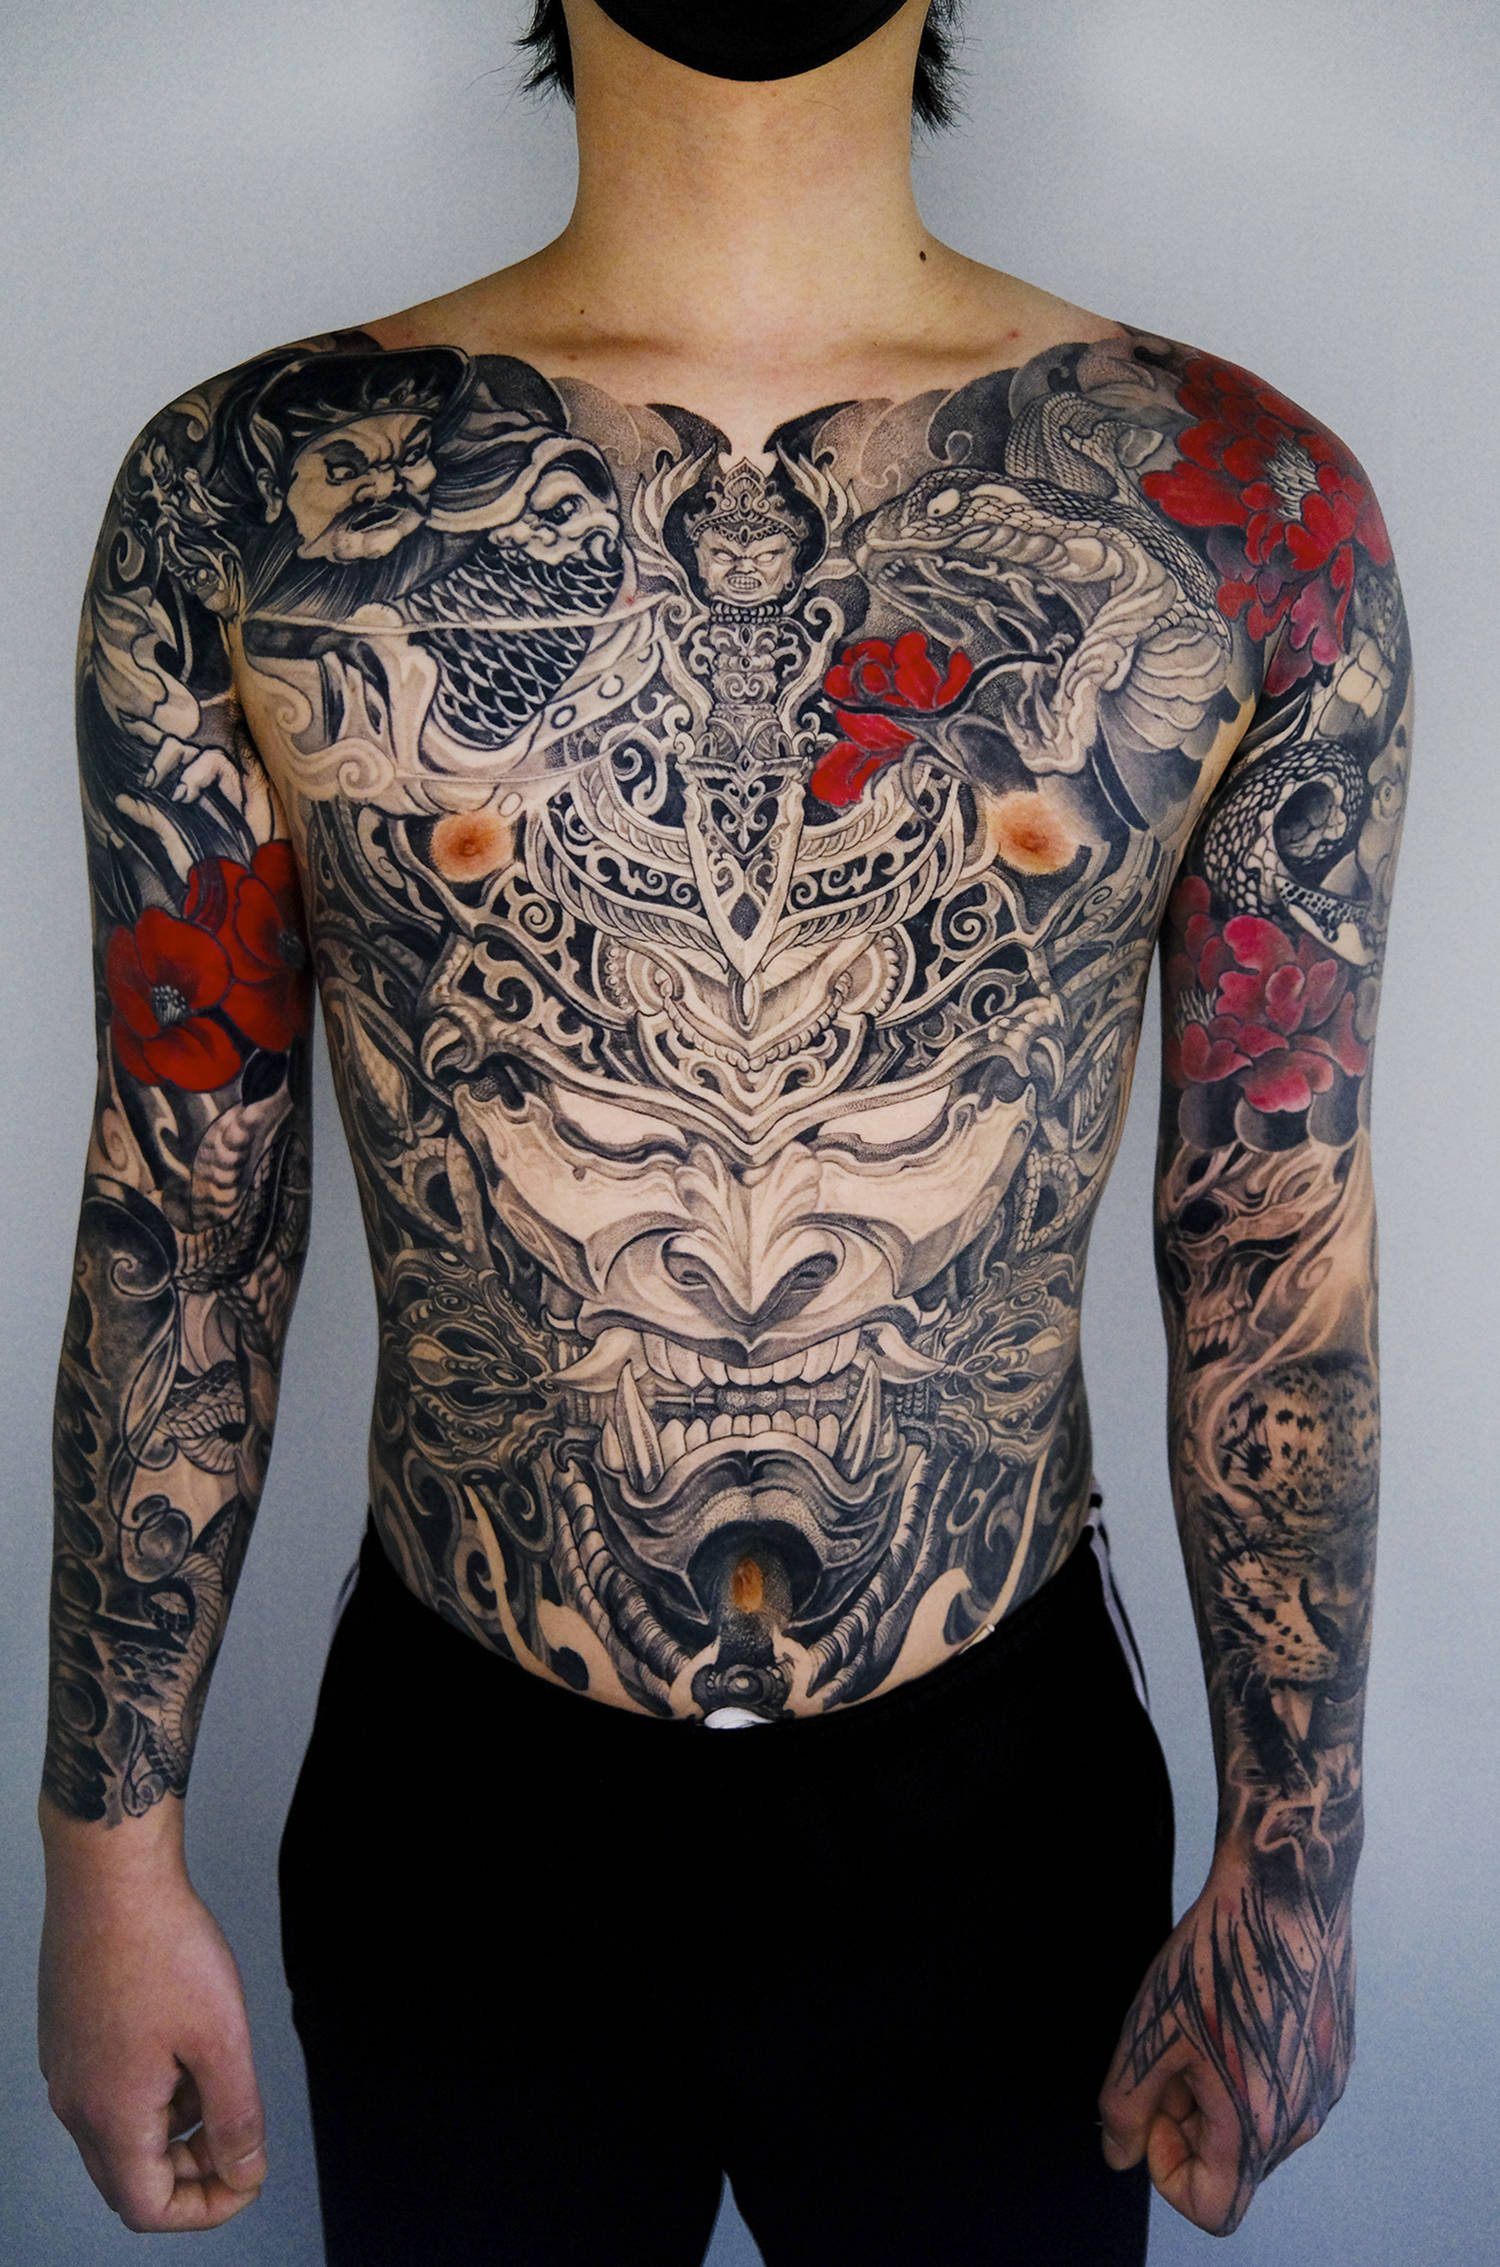 The torso and sleeves of one of Girin's best tattoos